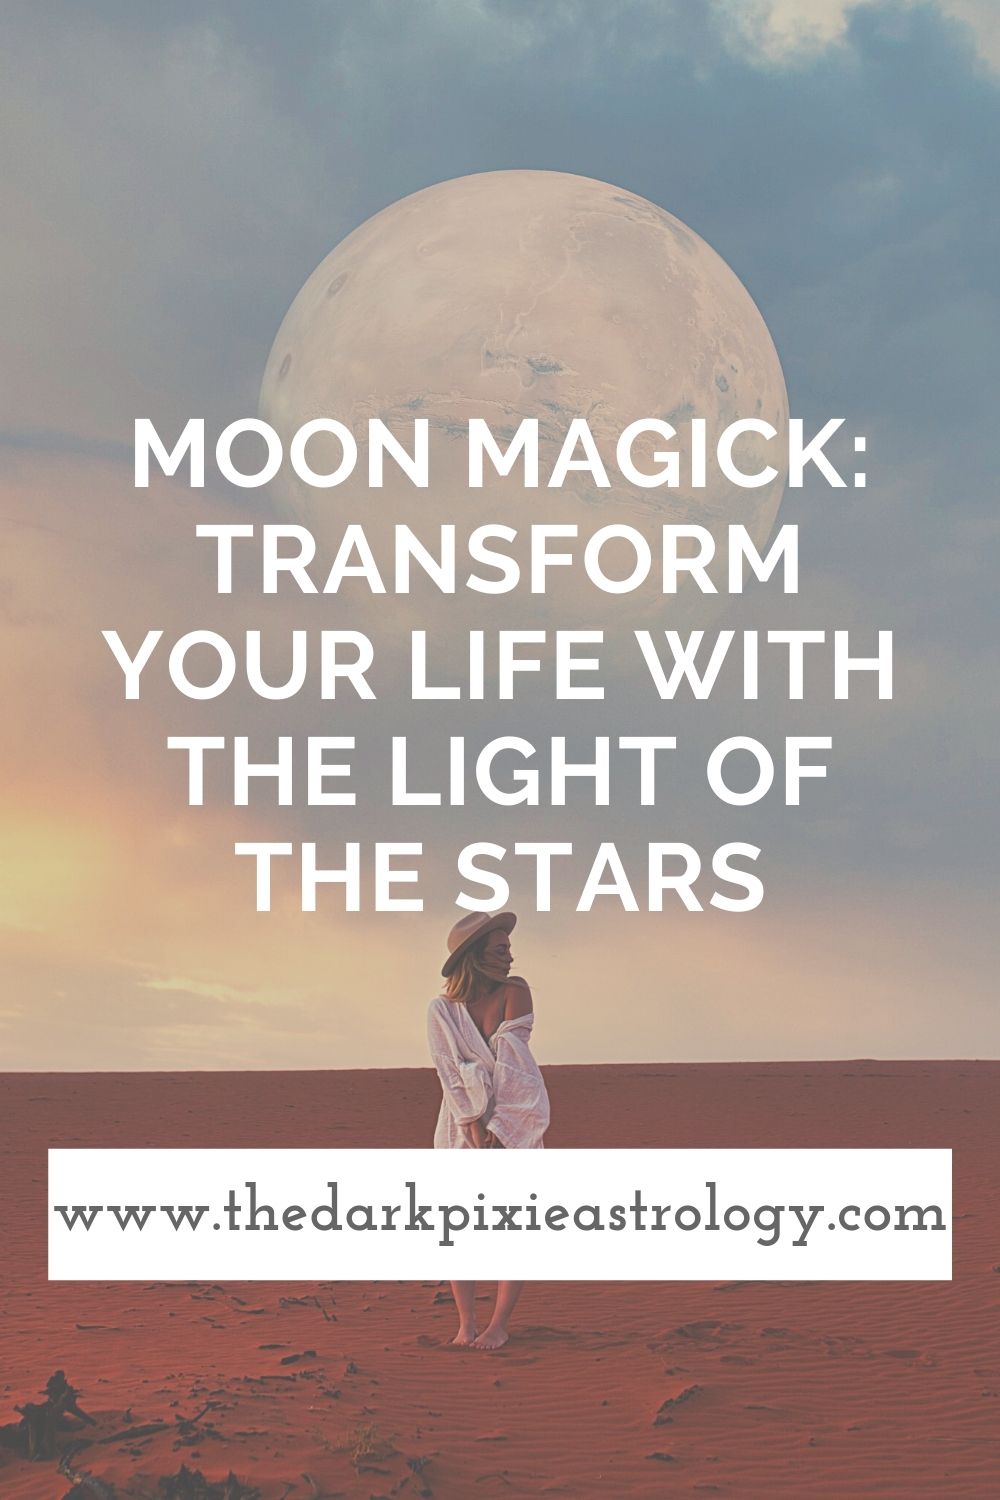 Moon Magick: Transform Your Life with the Light of the Stars by Regina Chouza for The Dark Pixie Astrology